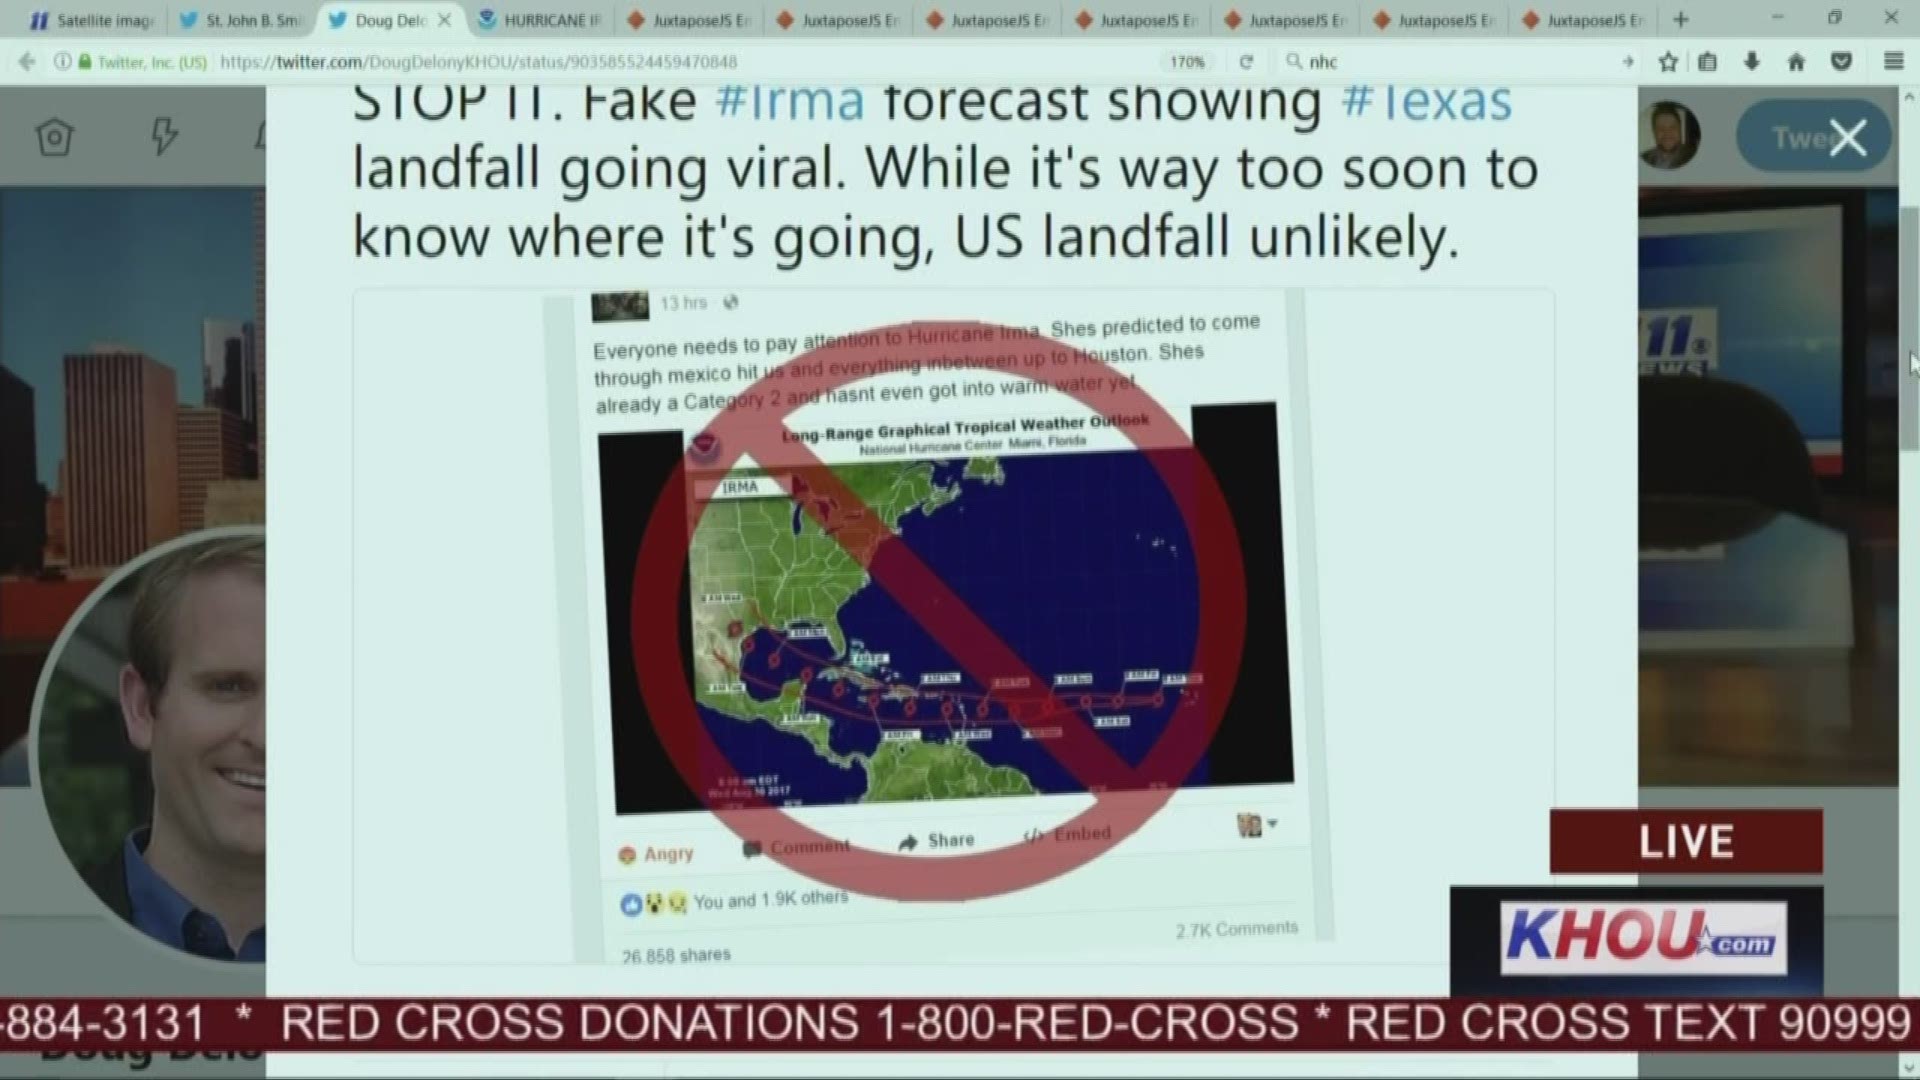 A fake photo showing Hurricane Irma's path falsely shows the storm moving toward Texas.